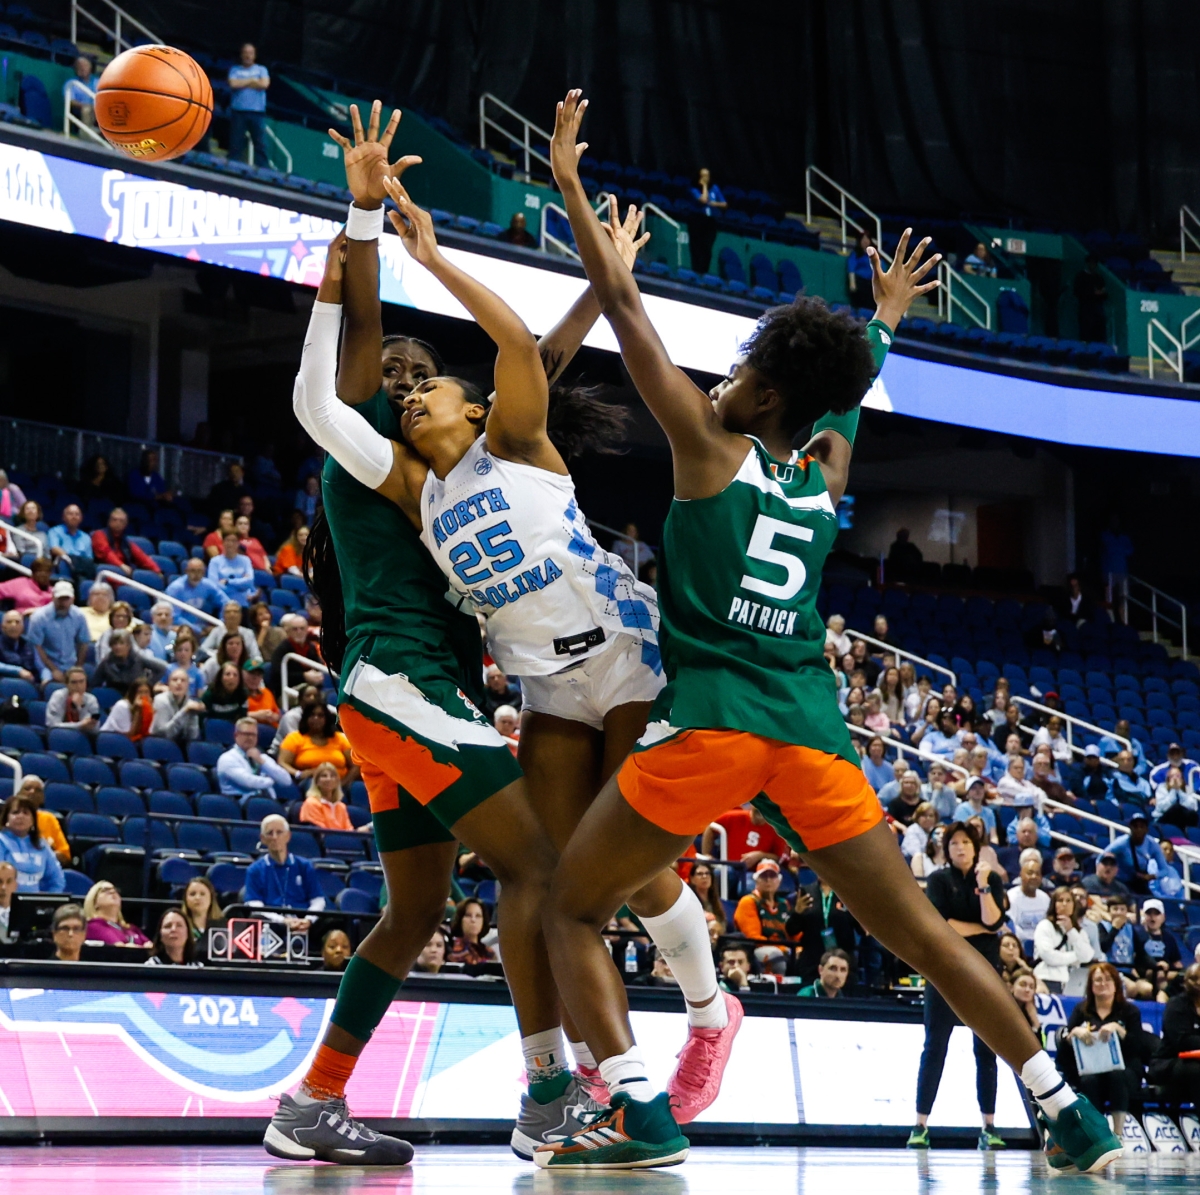 Miami ousts UNC Women's Basketball from ACC Tournament after chaotic final minutes